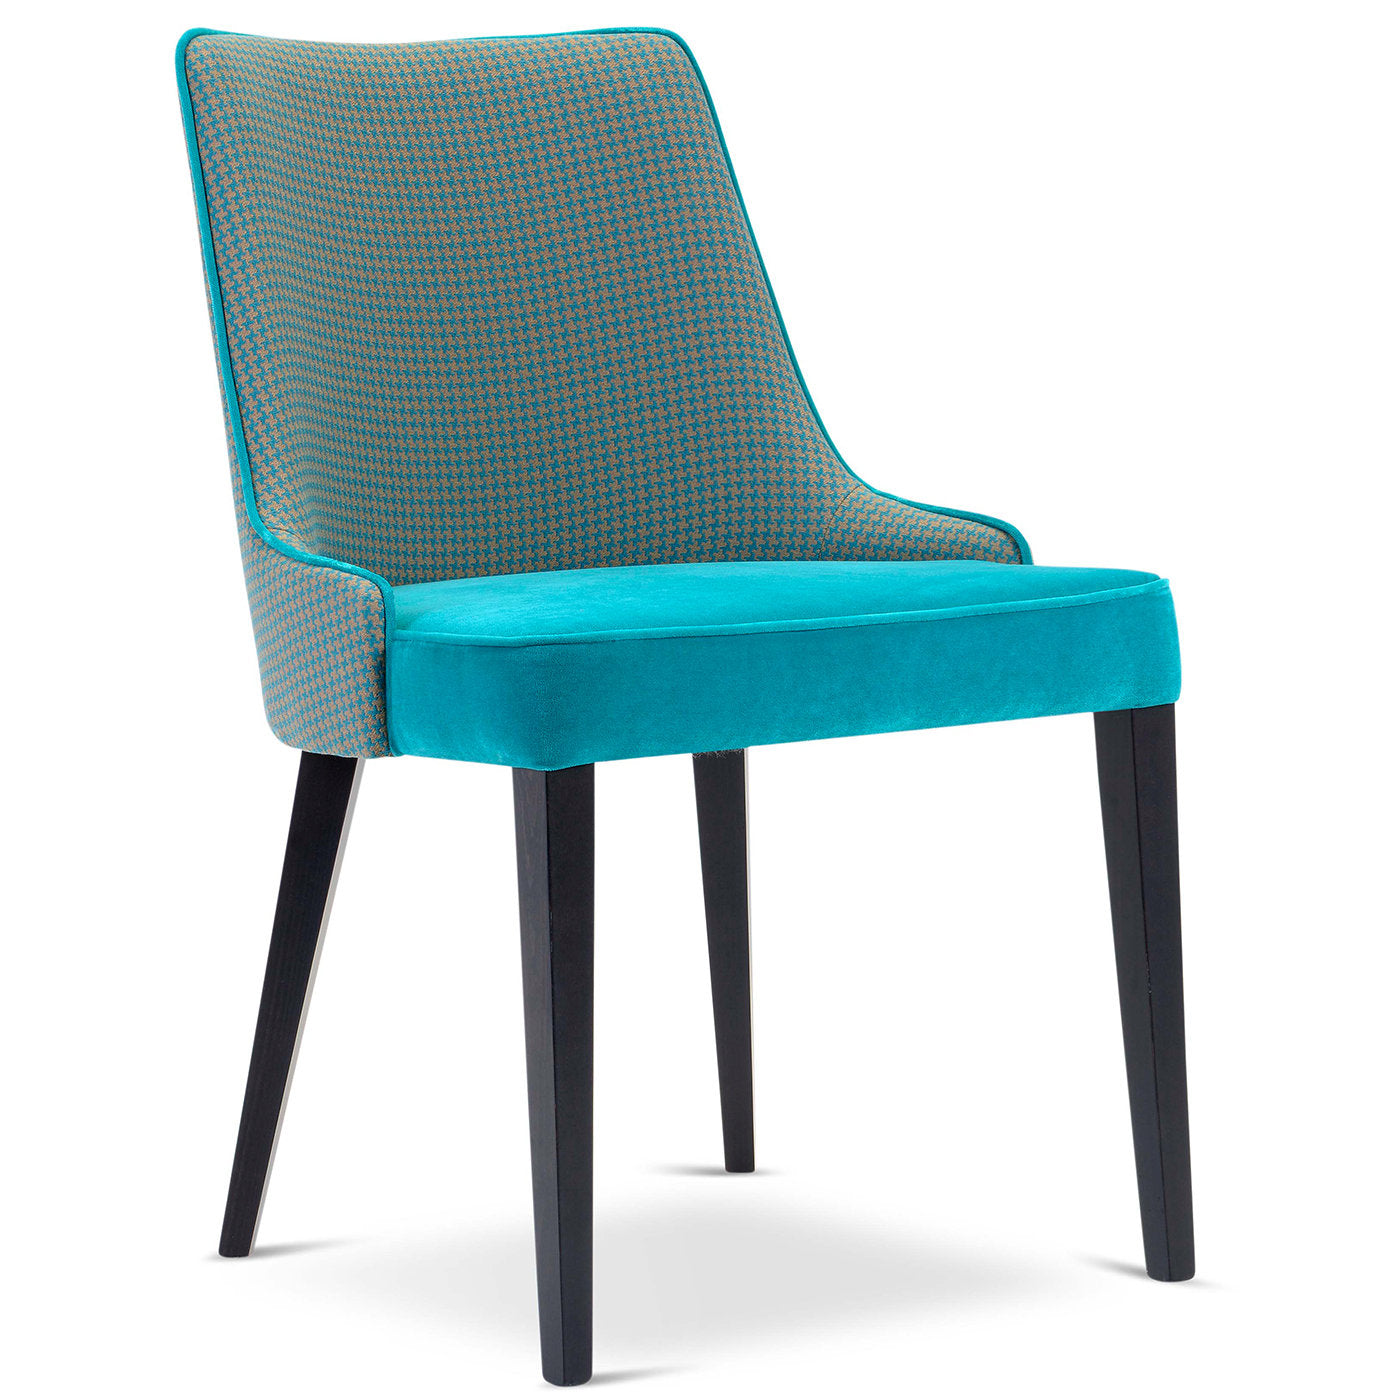 Pat Turquoise/Gray Chair - Alternative view 1